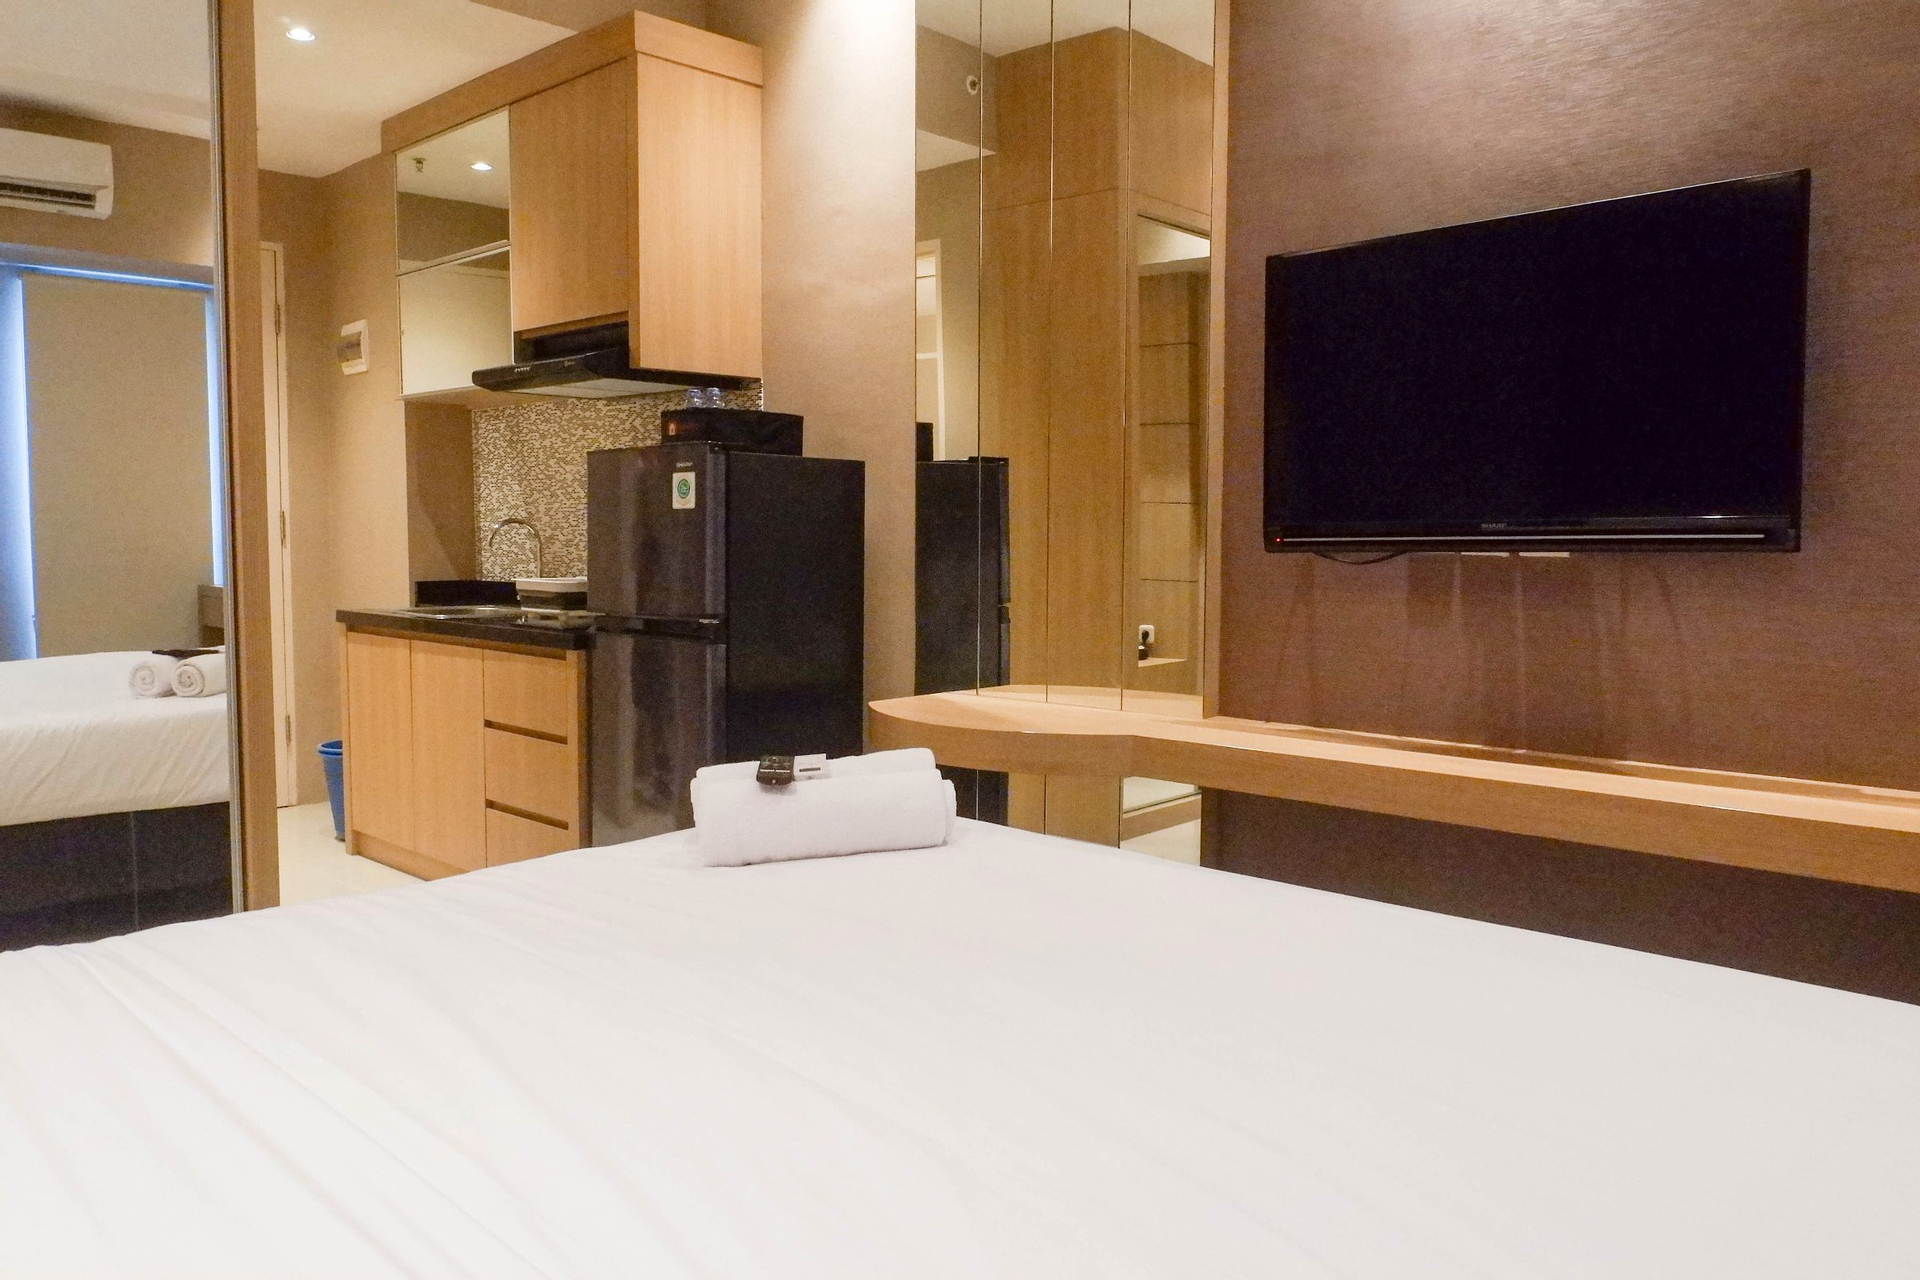 Bedroom 4, Enchanting and Dreamy Studio Apartment at Orchard Supermall Mansion By Travelio, Surabaya